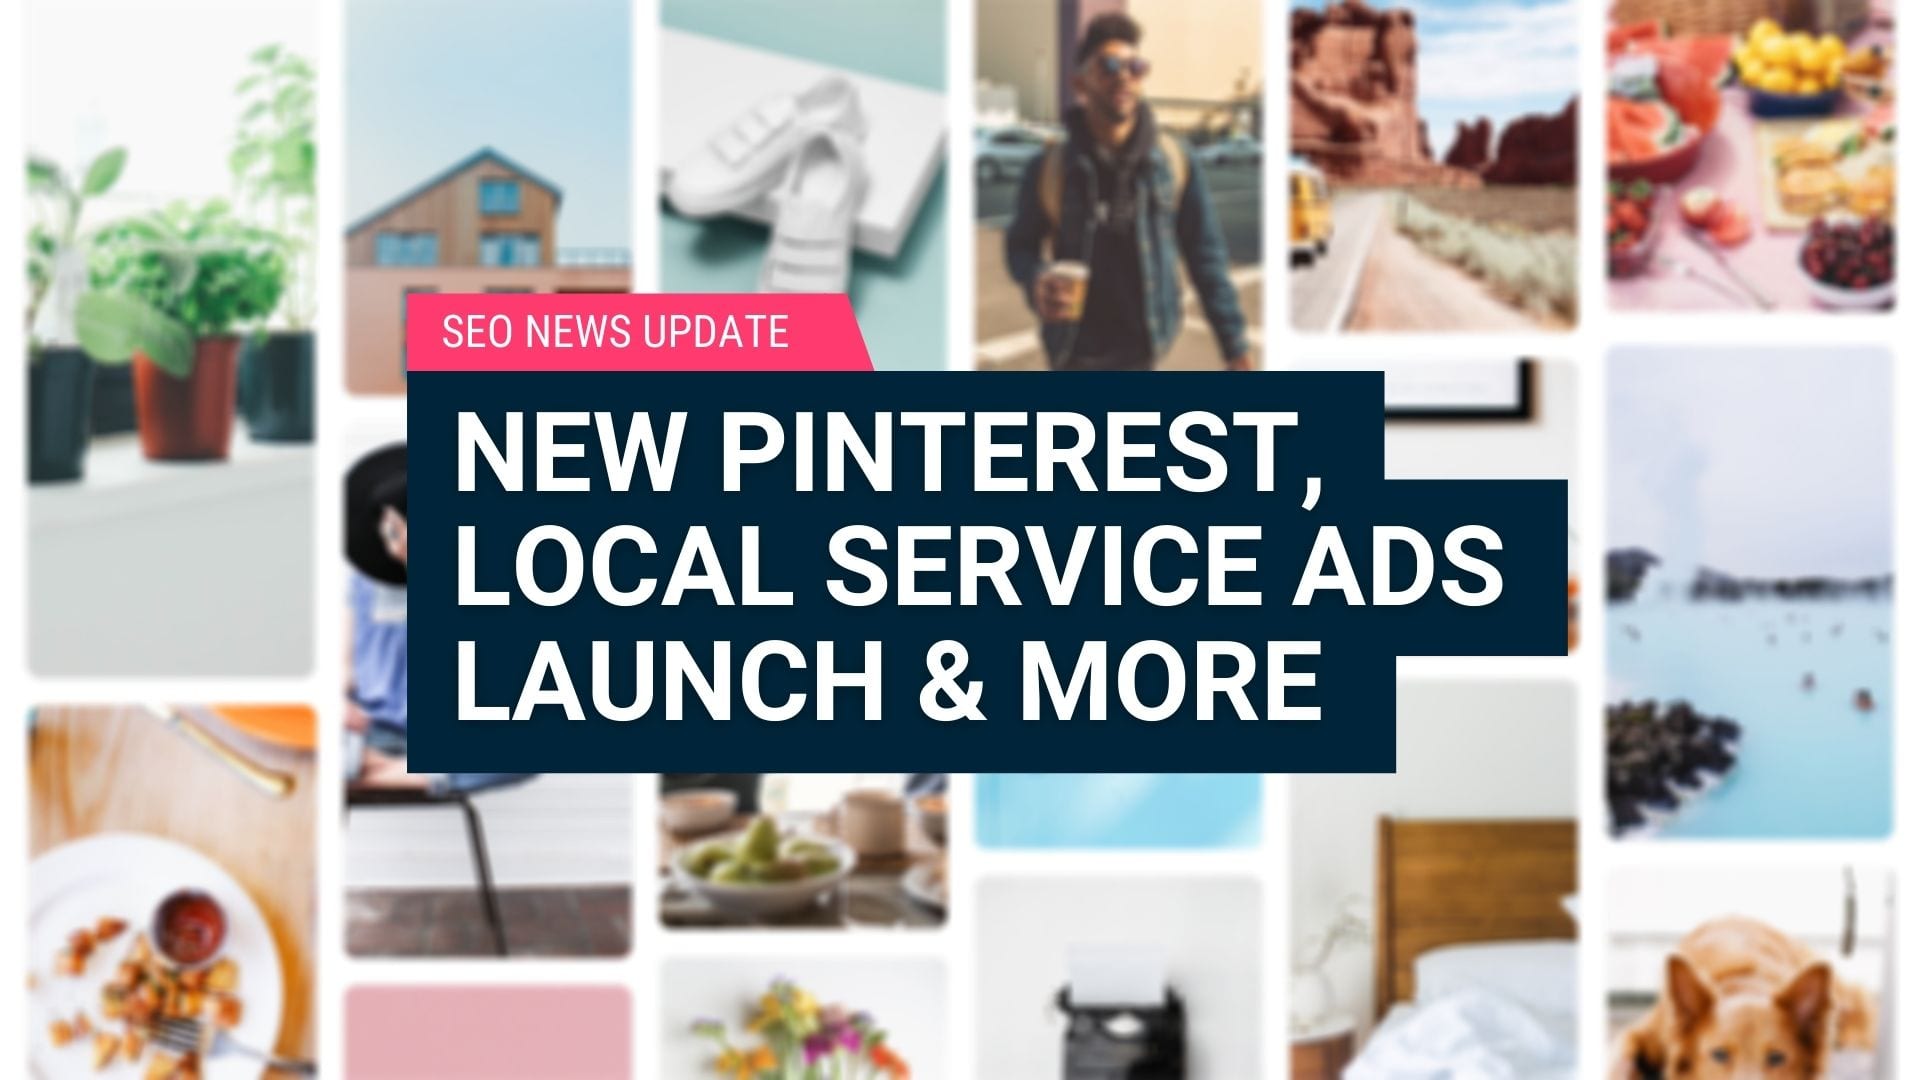 SEO News Update New Pinterest, Local Service Ads Launch & More